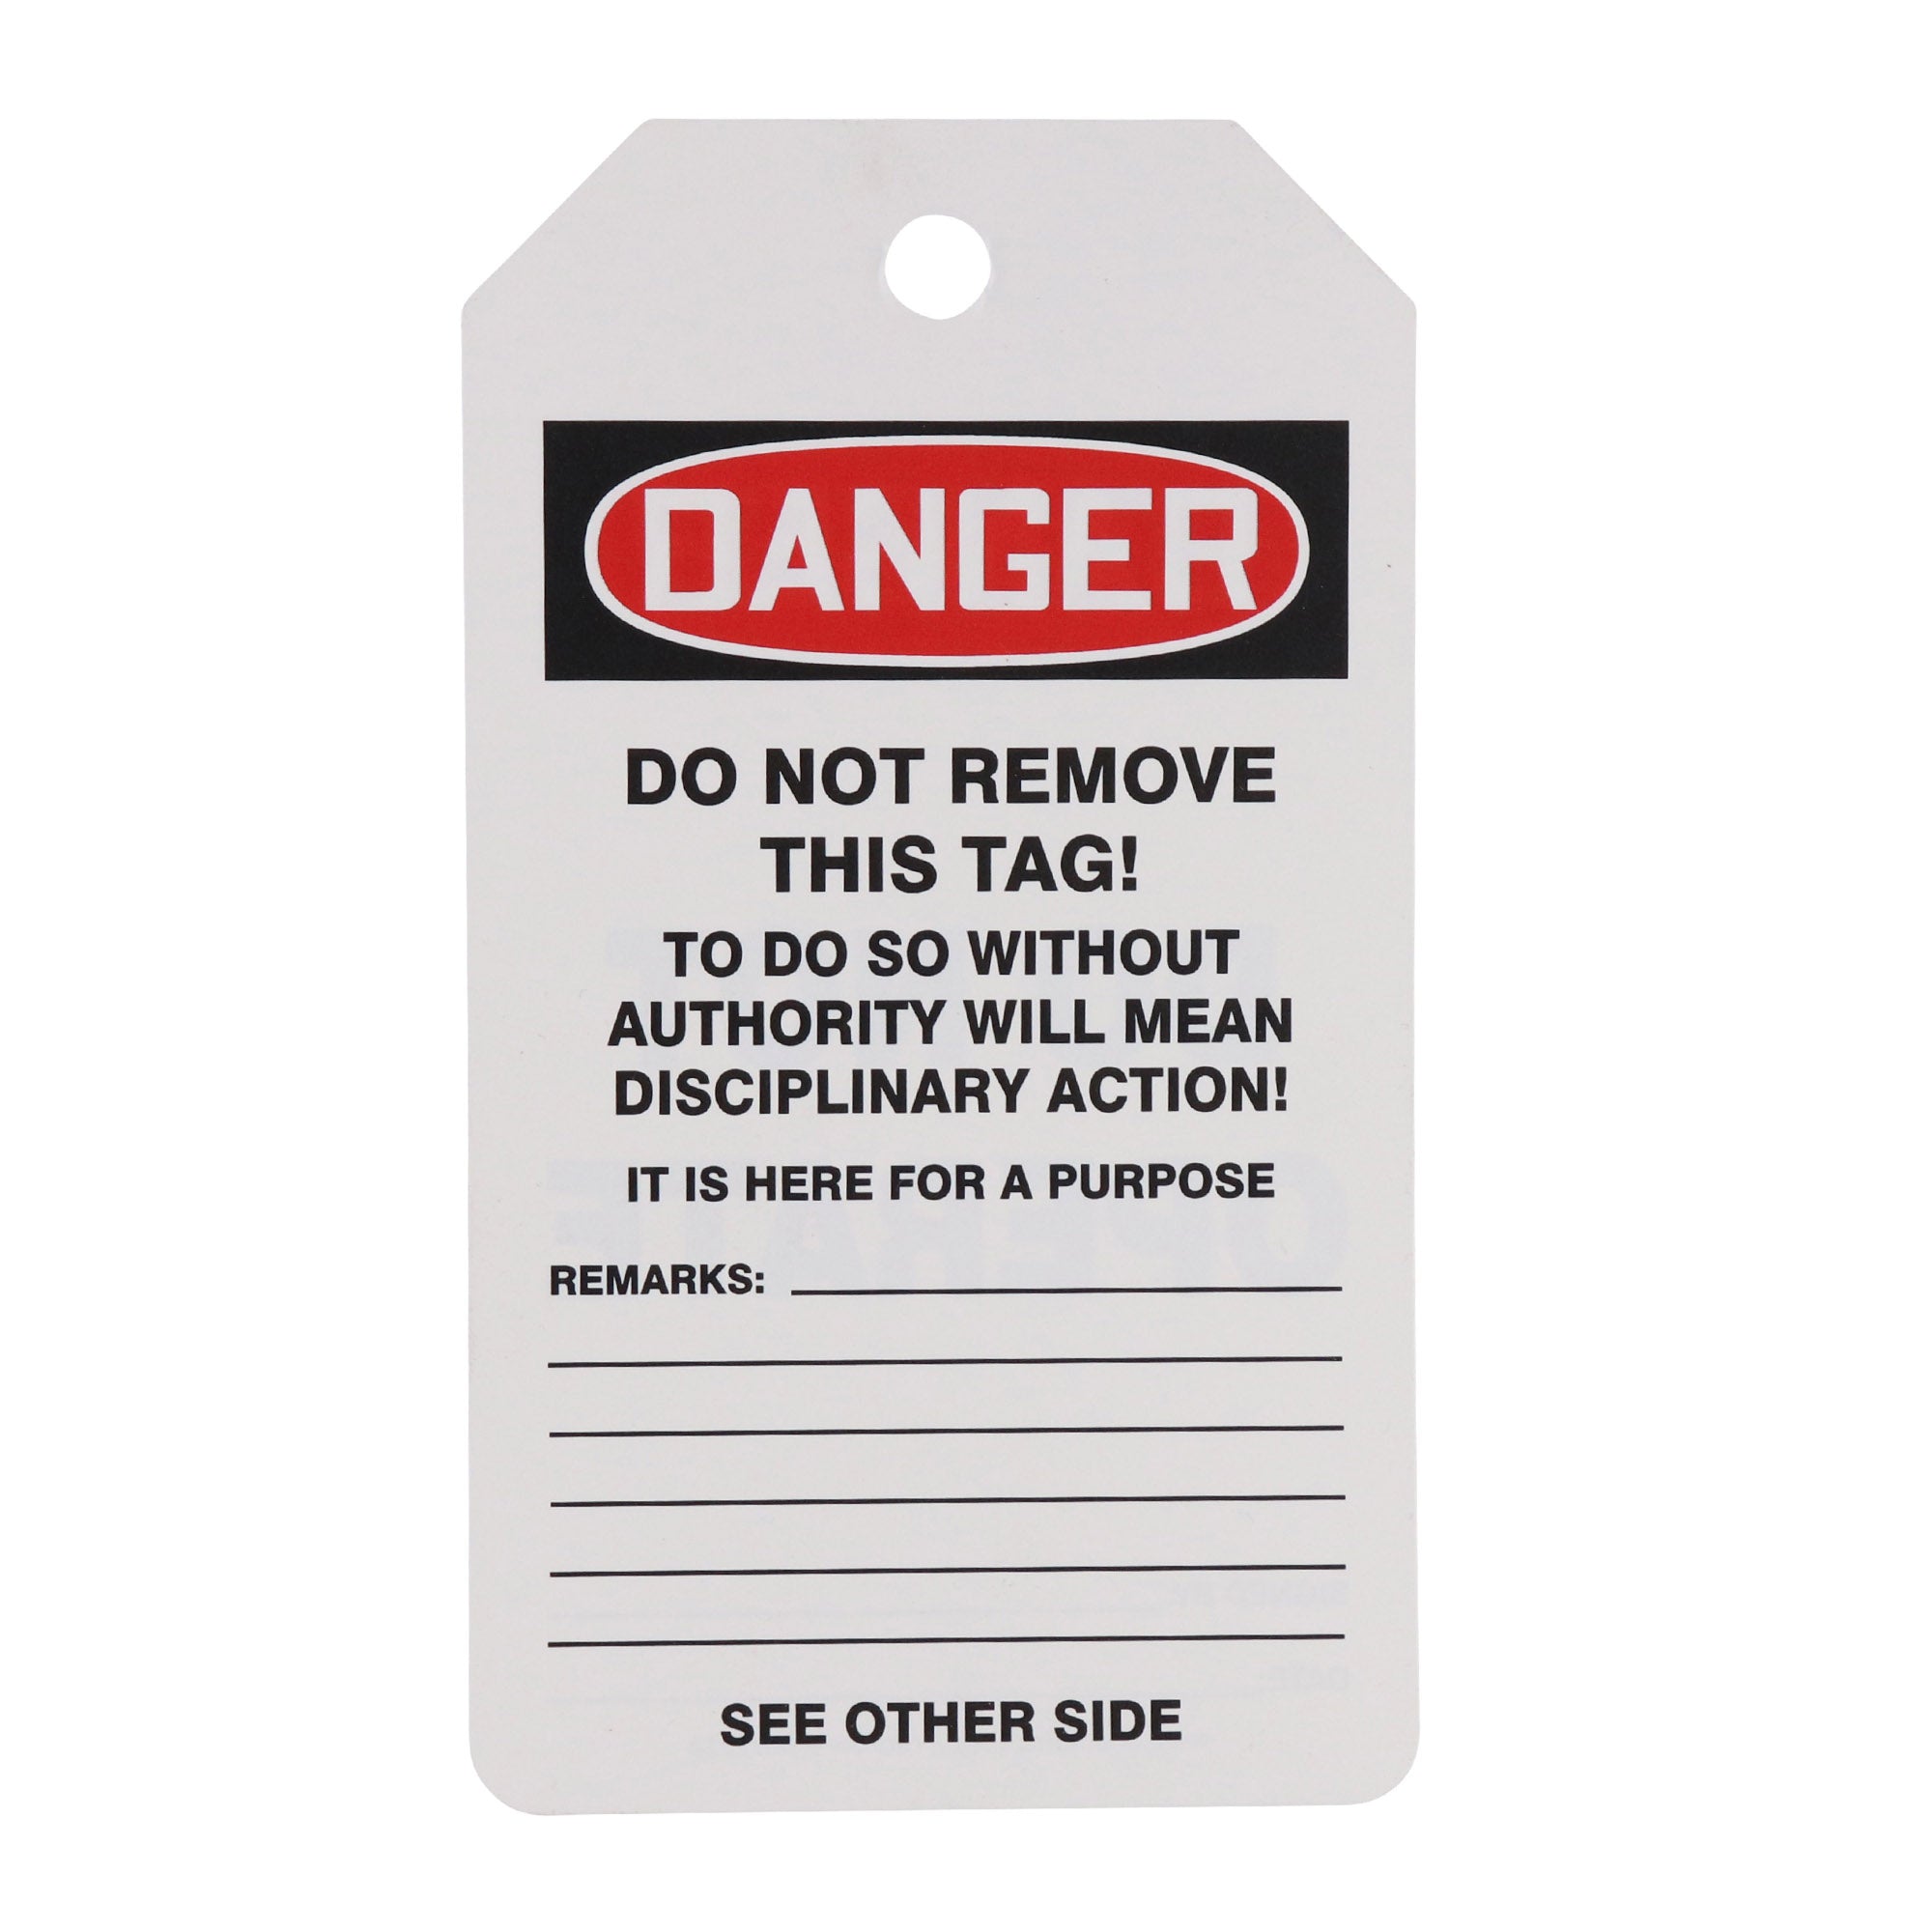 ACCUFORM, ACCUFORM MDT112 "DANGER DO NOT OPERATE" SAFETY TAG, 5.75" X 3.25", (25-PACK)